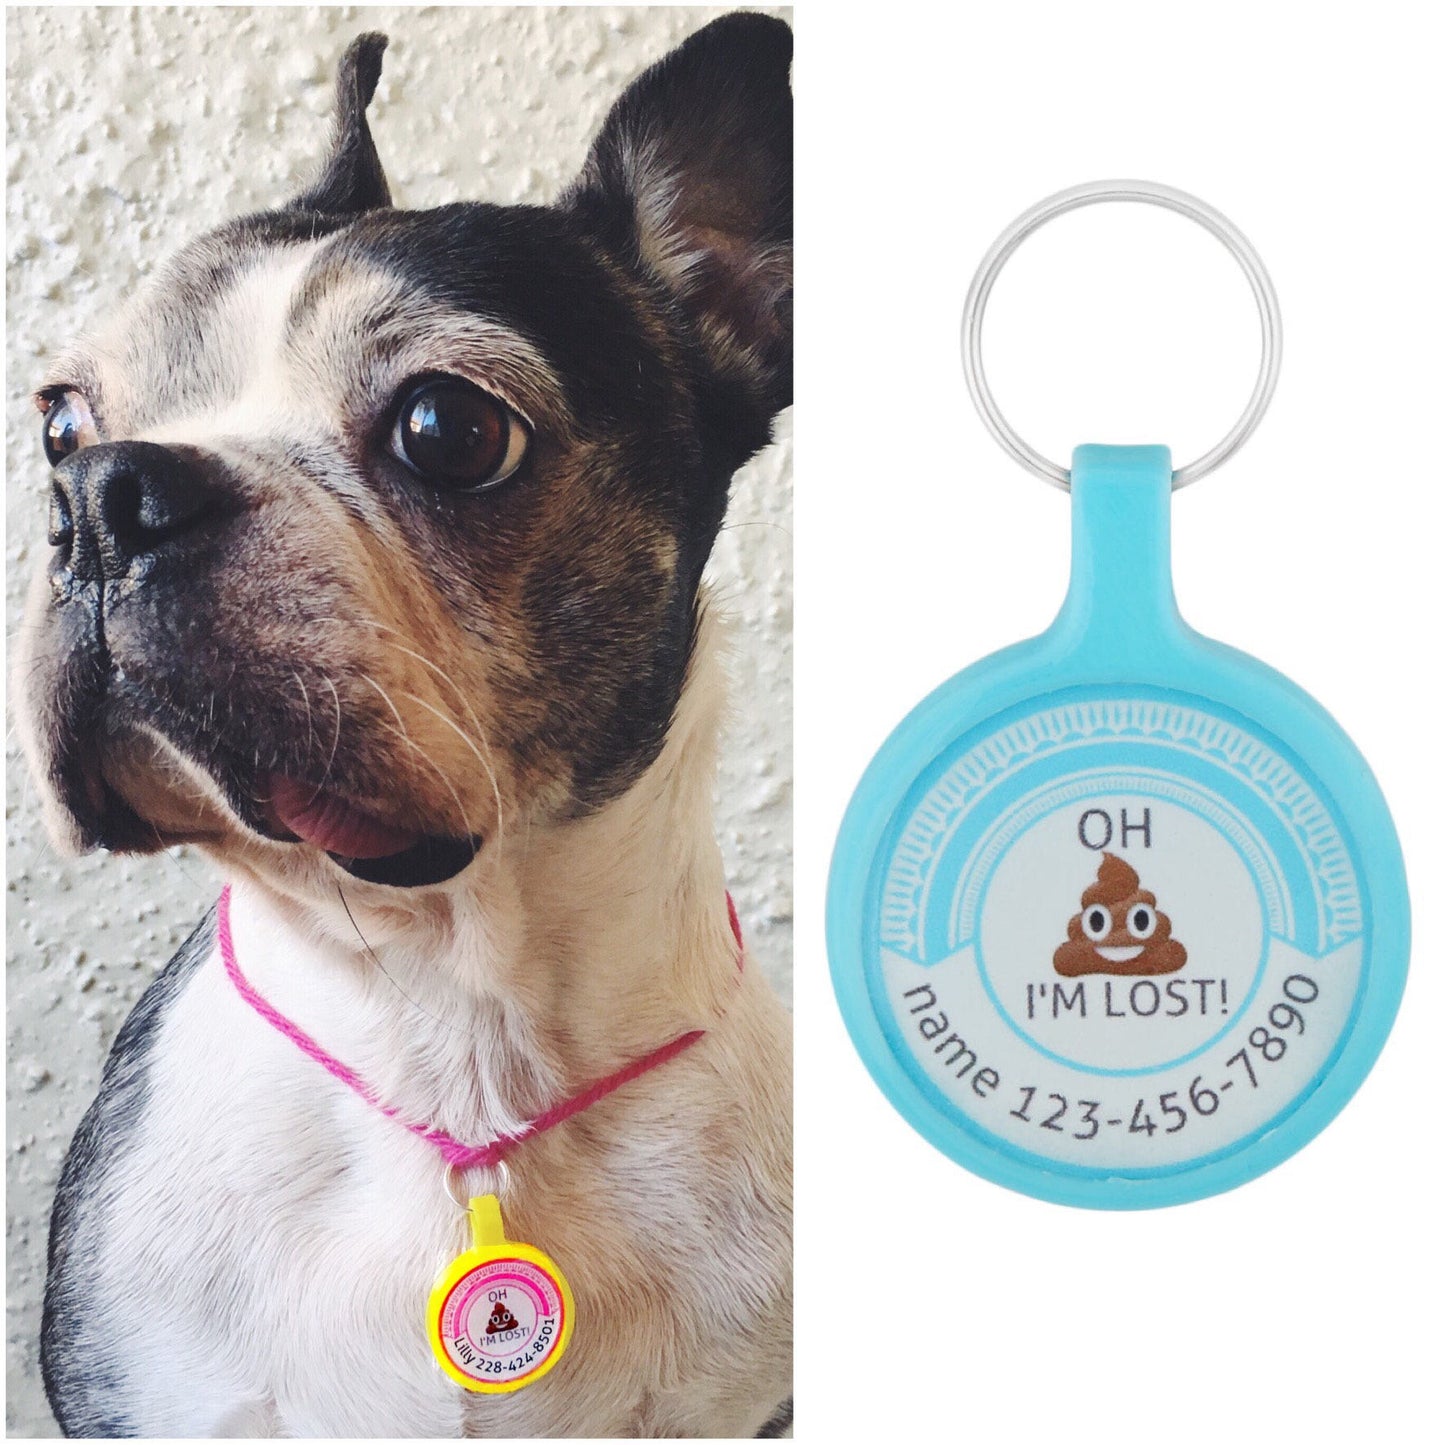 Oh Shit, I'm Lost! Personalized Dog ID Pet Tag Custom Pet Tag You Choose Tag Size & Colors, More Colors!